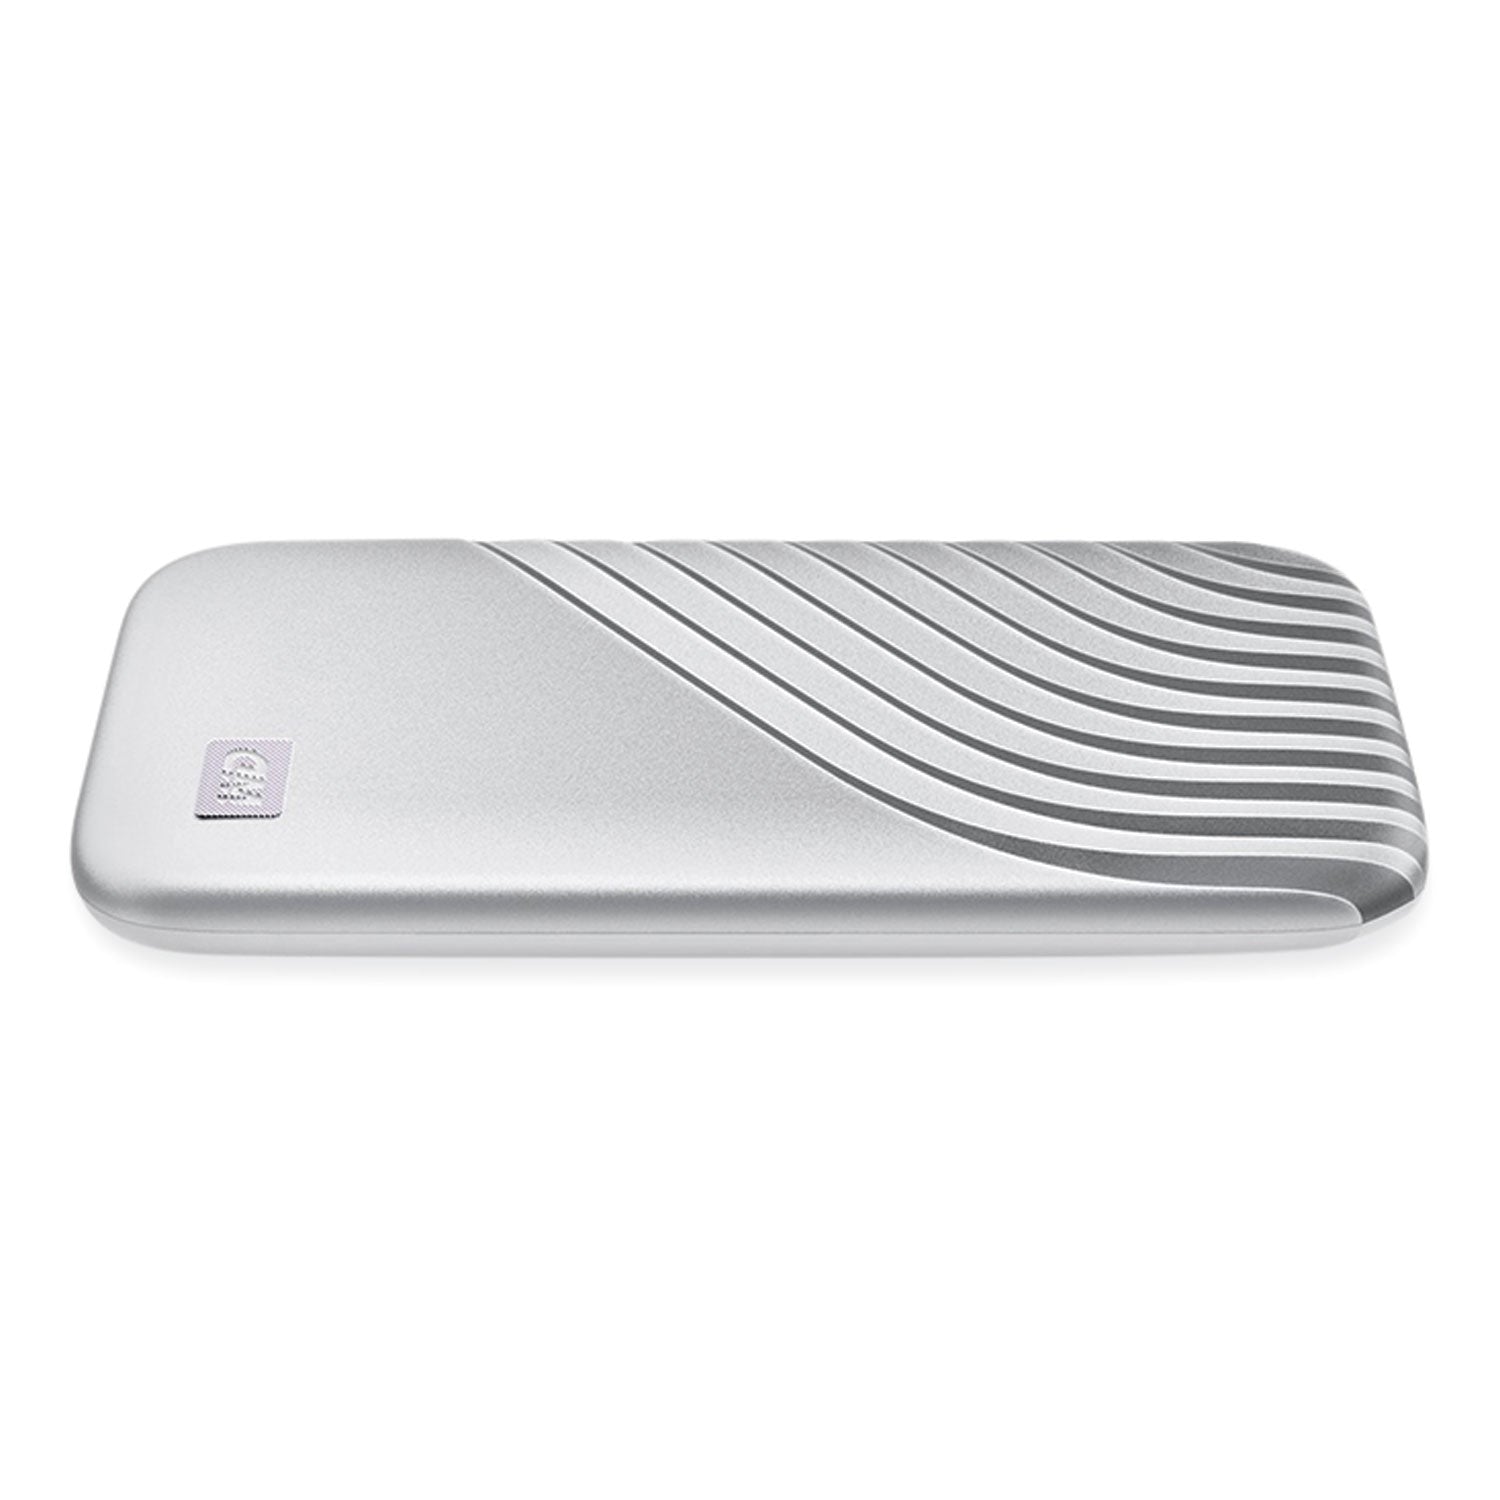 my-passport-external-solid-state-drive-1-tb-usb-32-silver_wdcagf0010bsl - 5